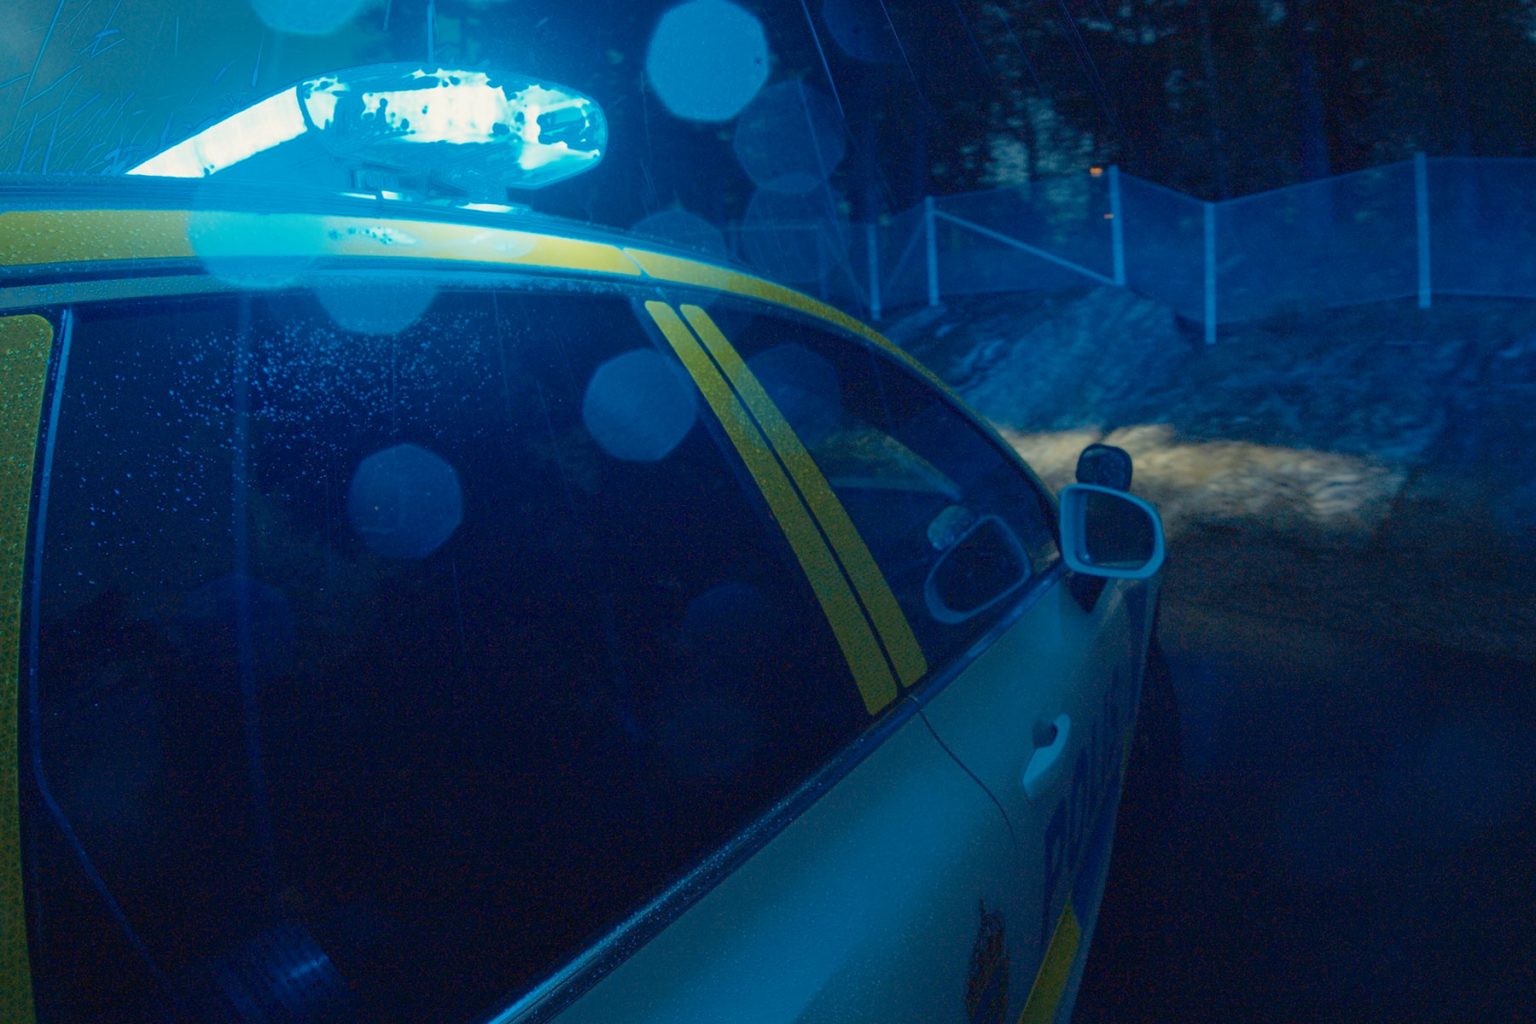 Page Image Lightbar on Car at Night Lit Blue, Screen Glares around lightbar on top of a white vehicle with yellow graphics, wooded location behind fence in background